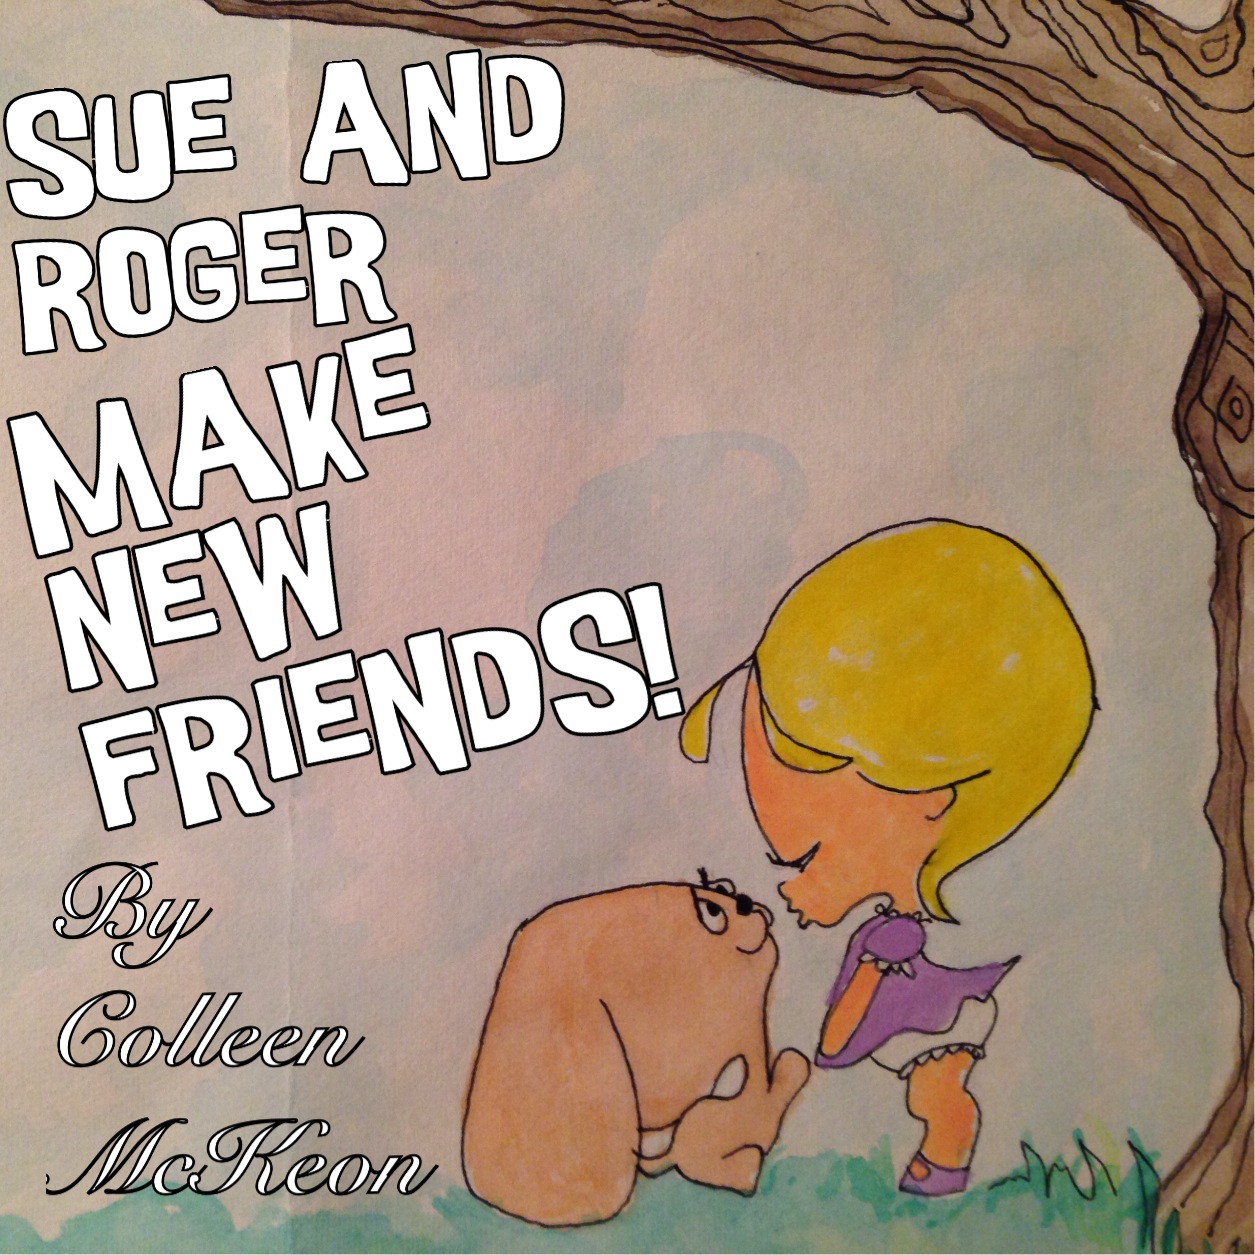 "SUE AND ROGER MAKE NEW FRIENDS!"